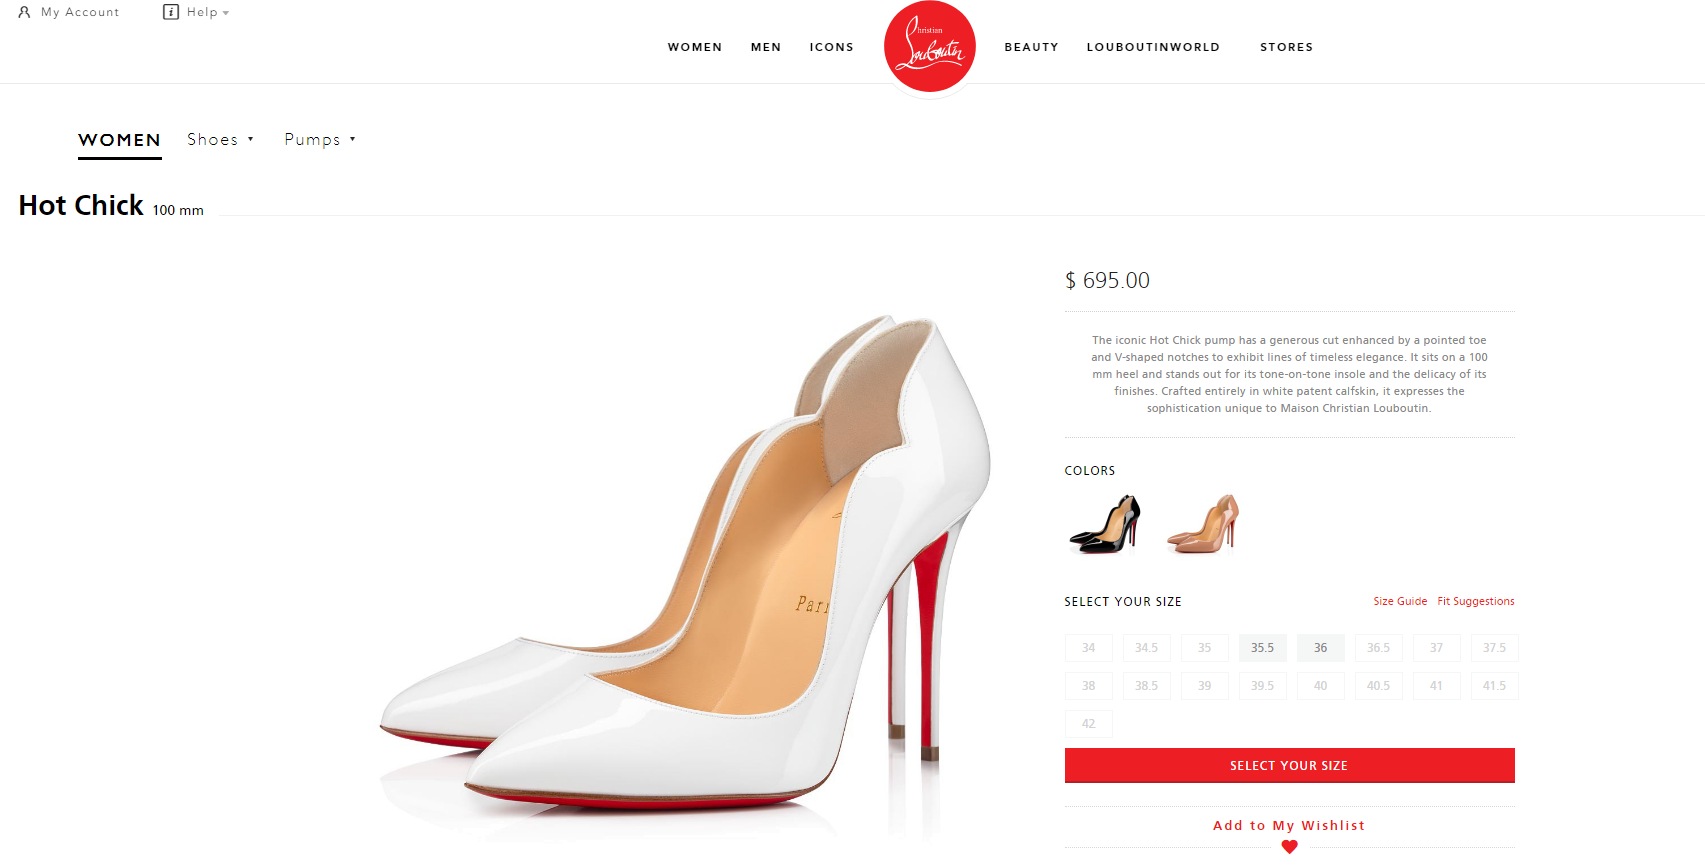 Nora Fatehi's shoes are worth ₹51,076.(christianlouboutin.com)